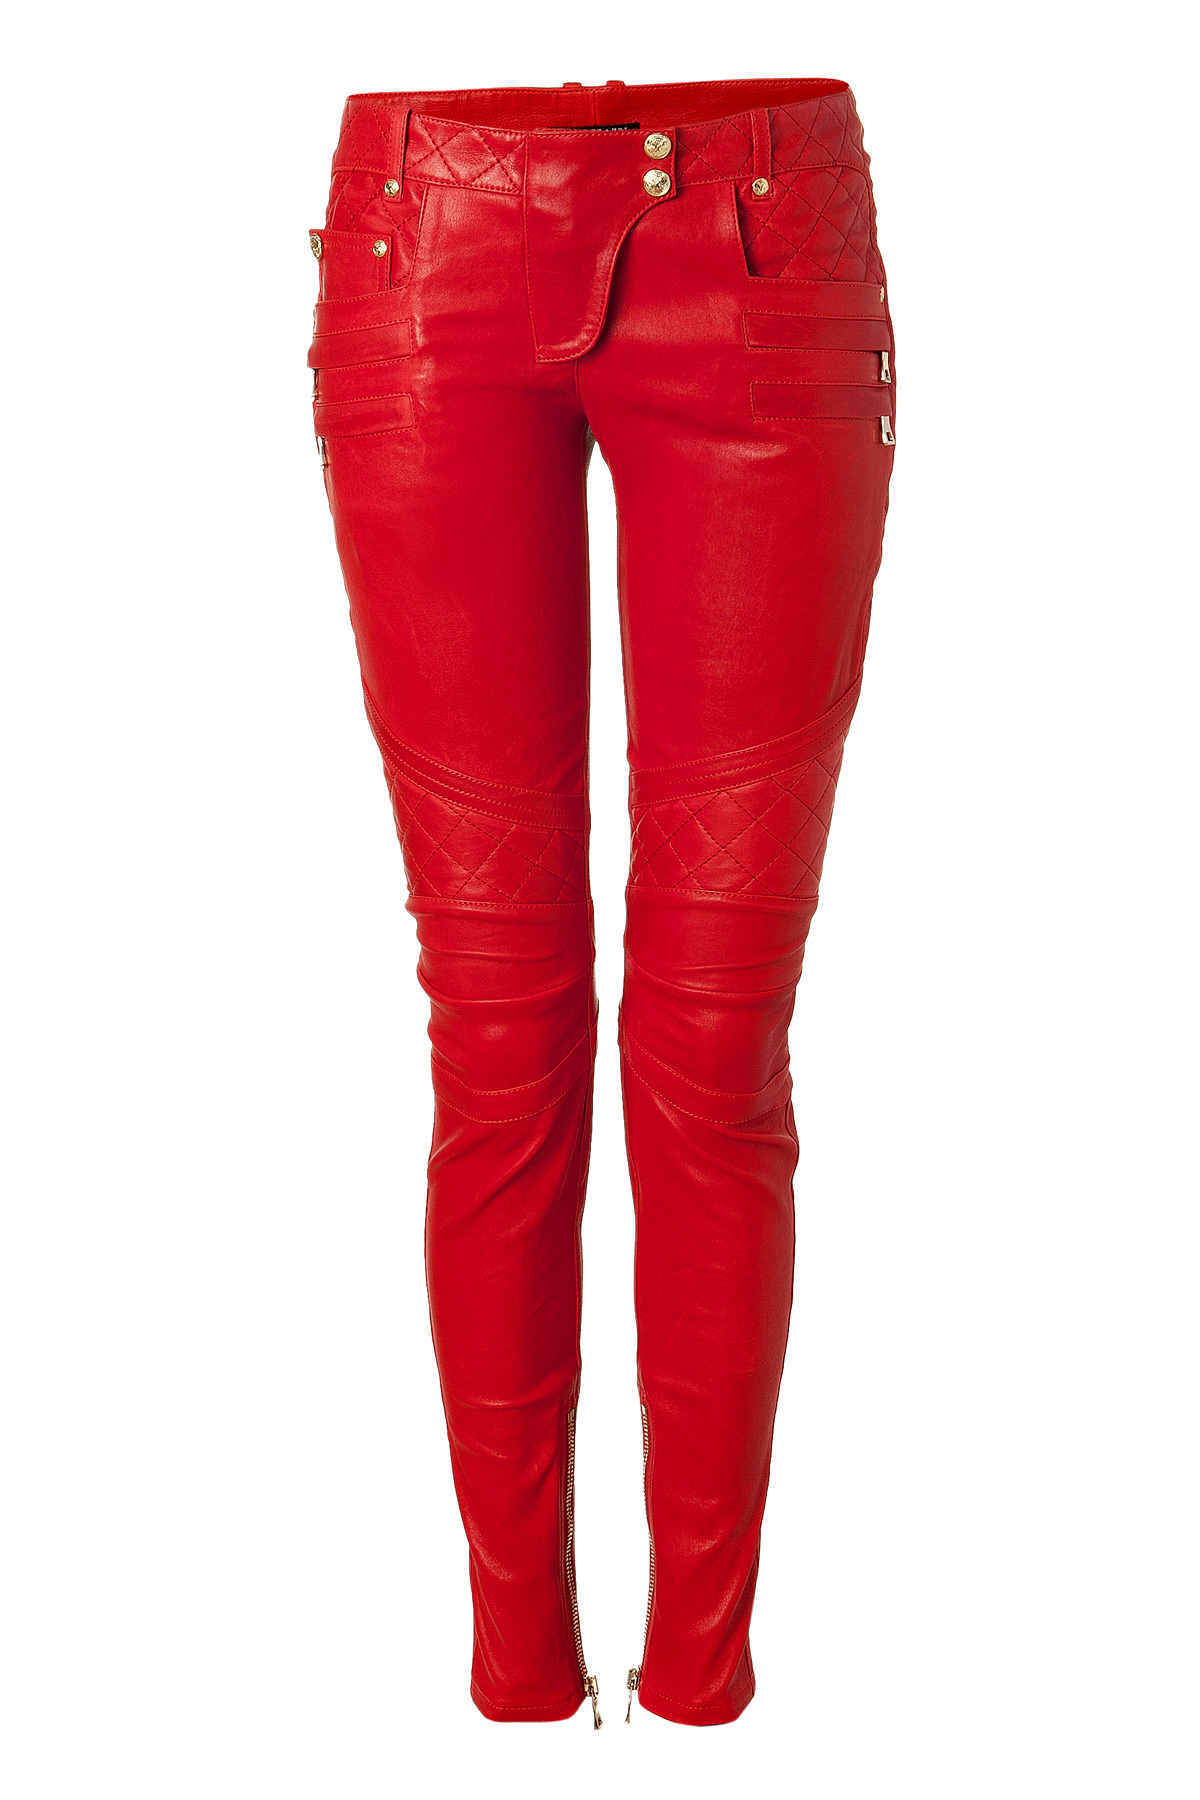 Balmain Lipstick Lowrise Skinny Leather Pants in Red | Lyst